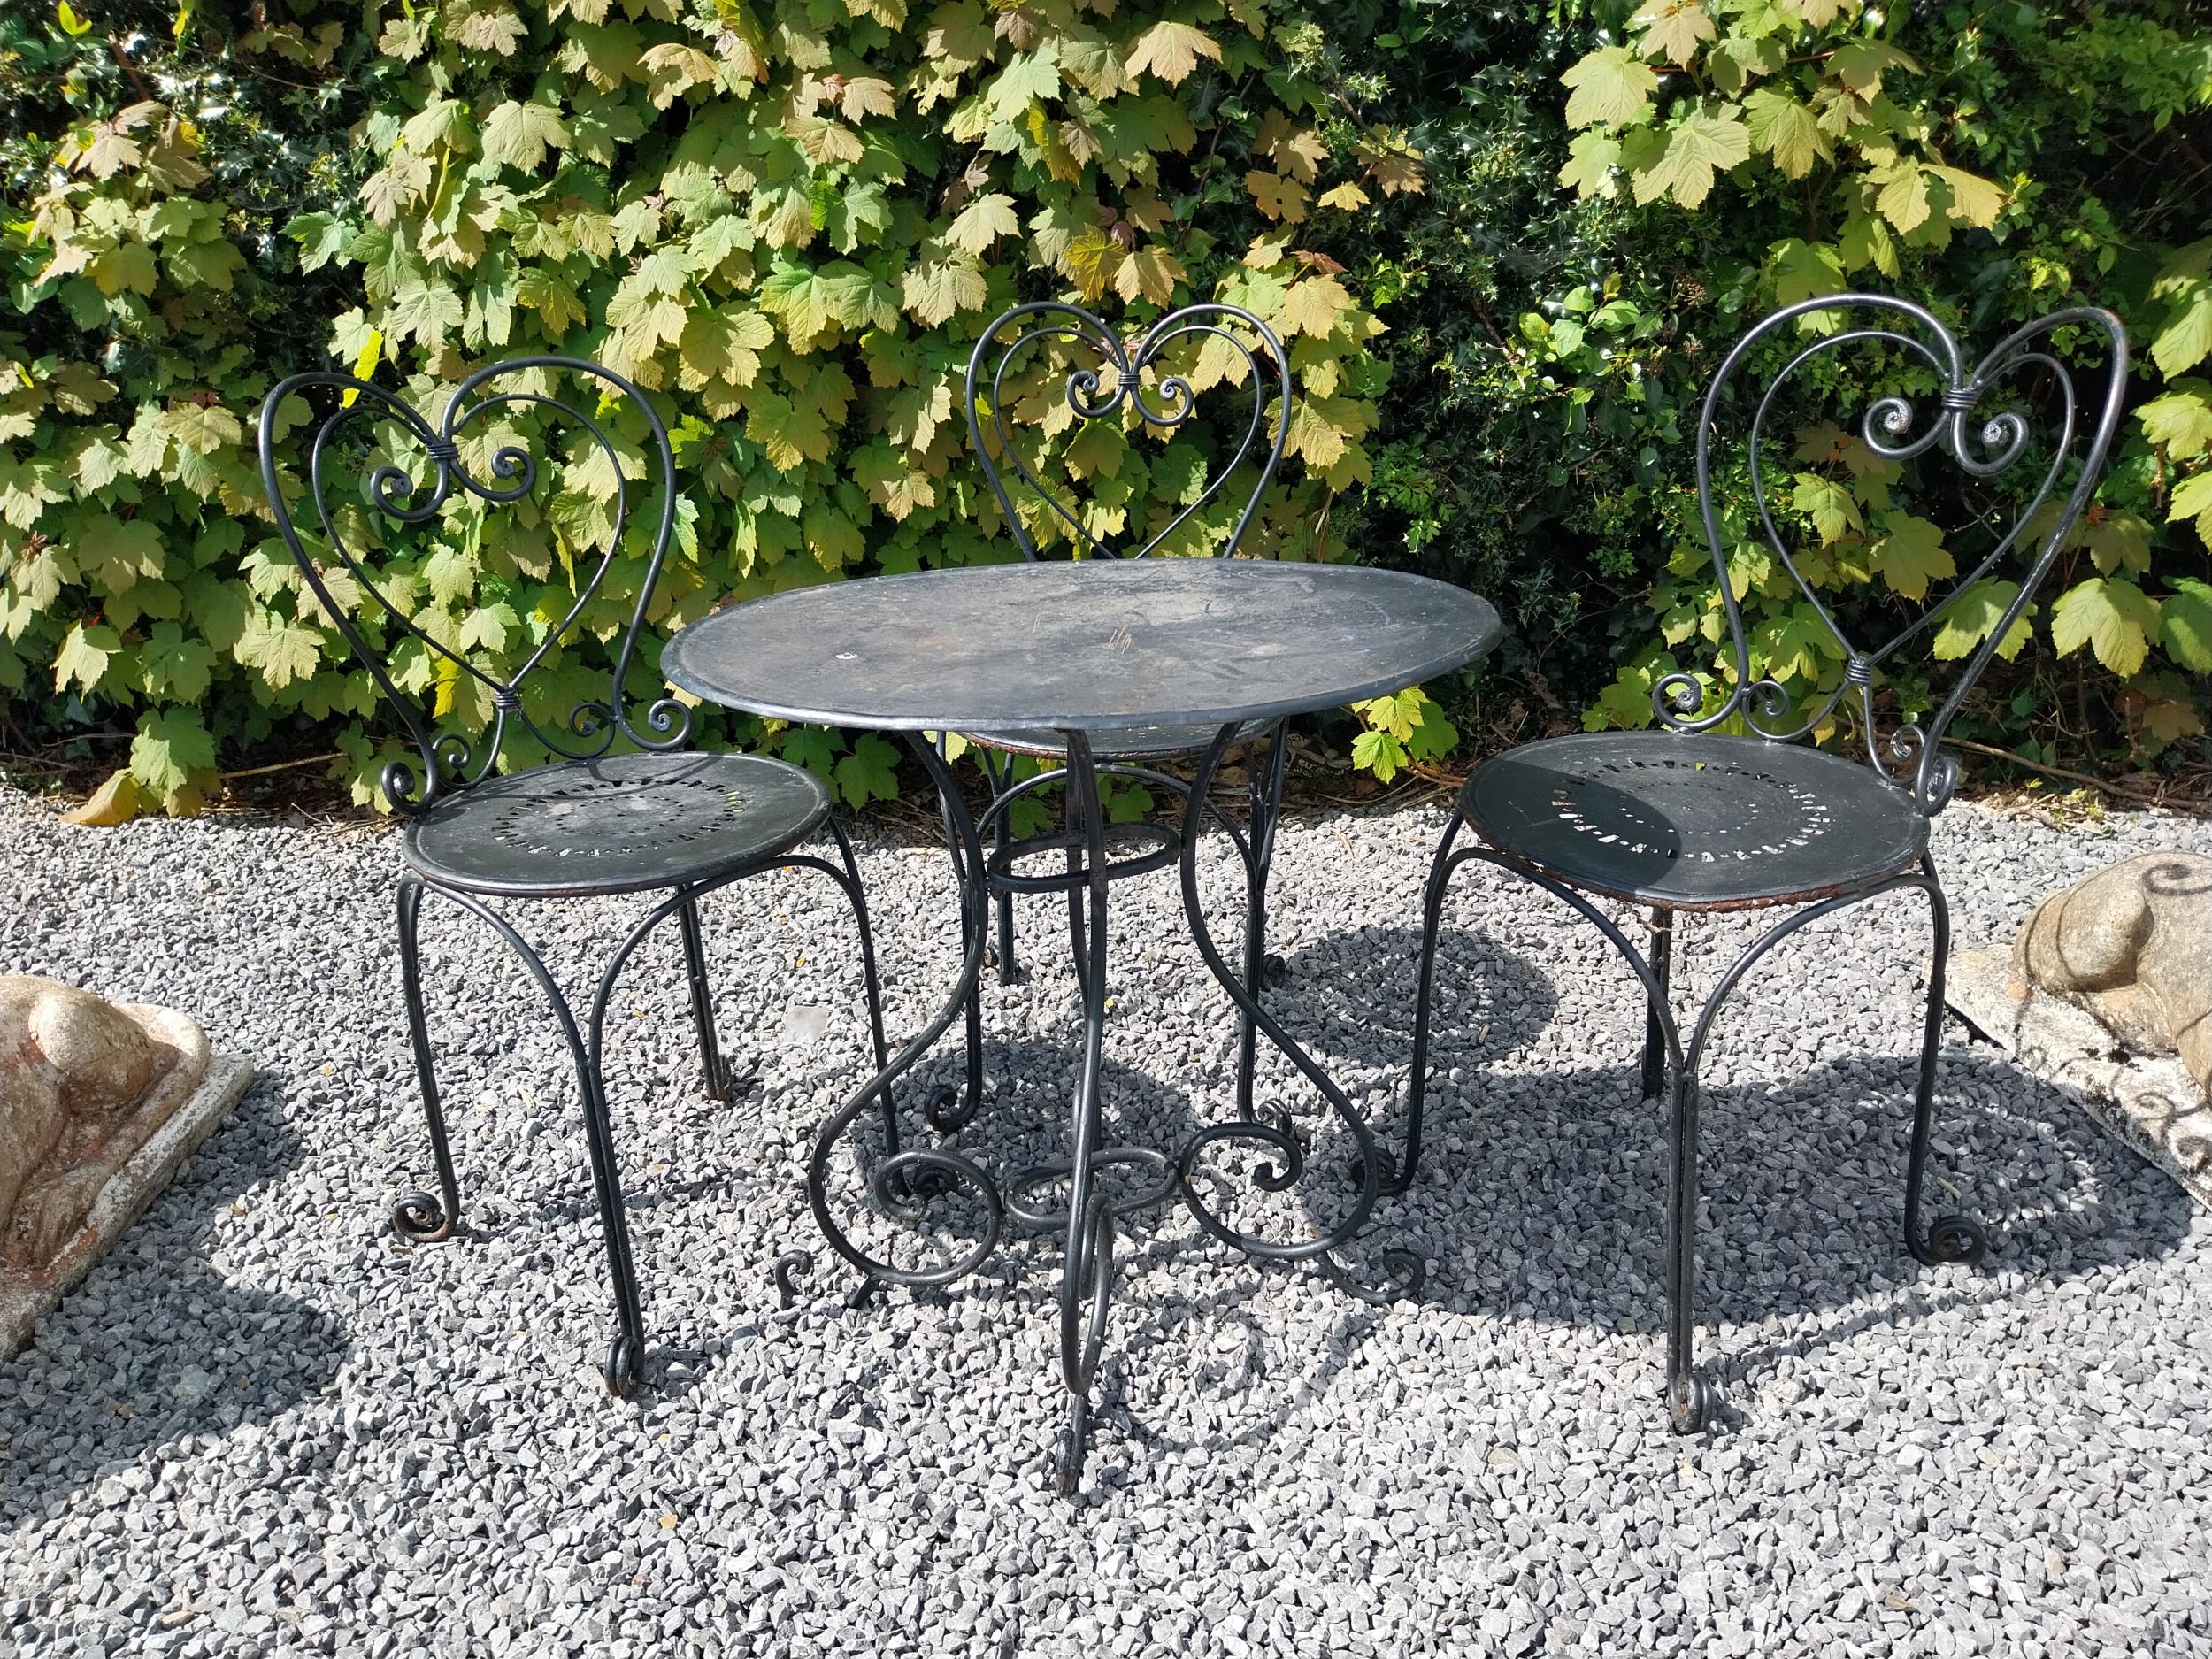 Wrought iron garden table with three matching chairs {Tbl. 65 cm H x 65 cm Dia. and Chairs 82 cm H x